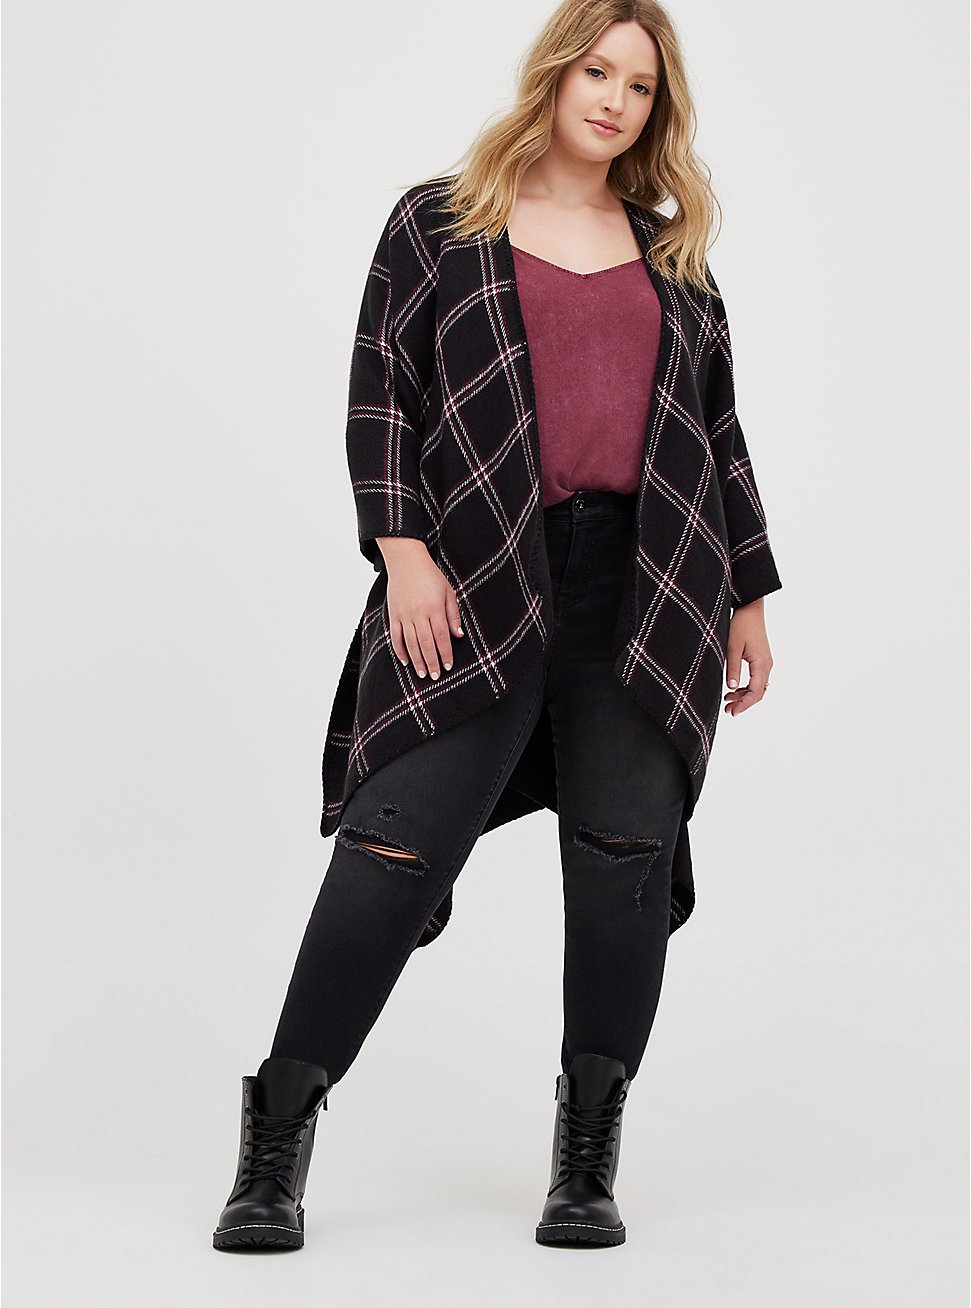 Plus Size Belted Ruana - Plaid Black & Red, , hi-res